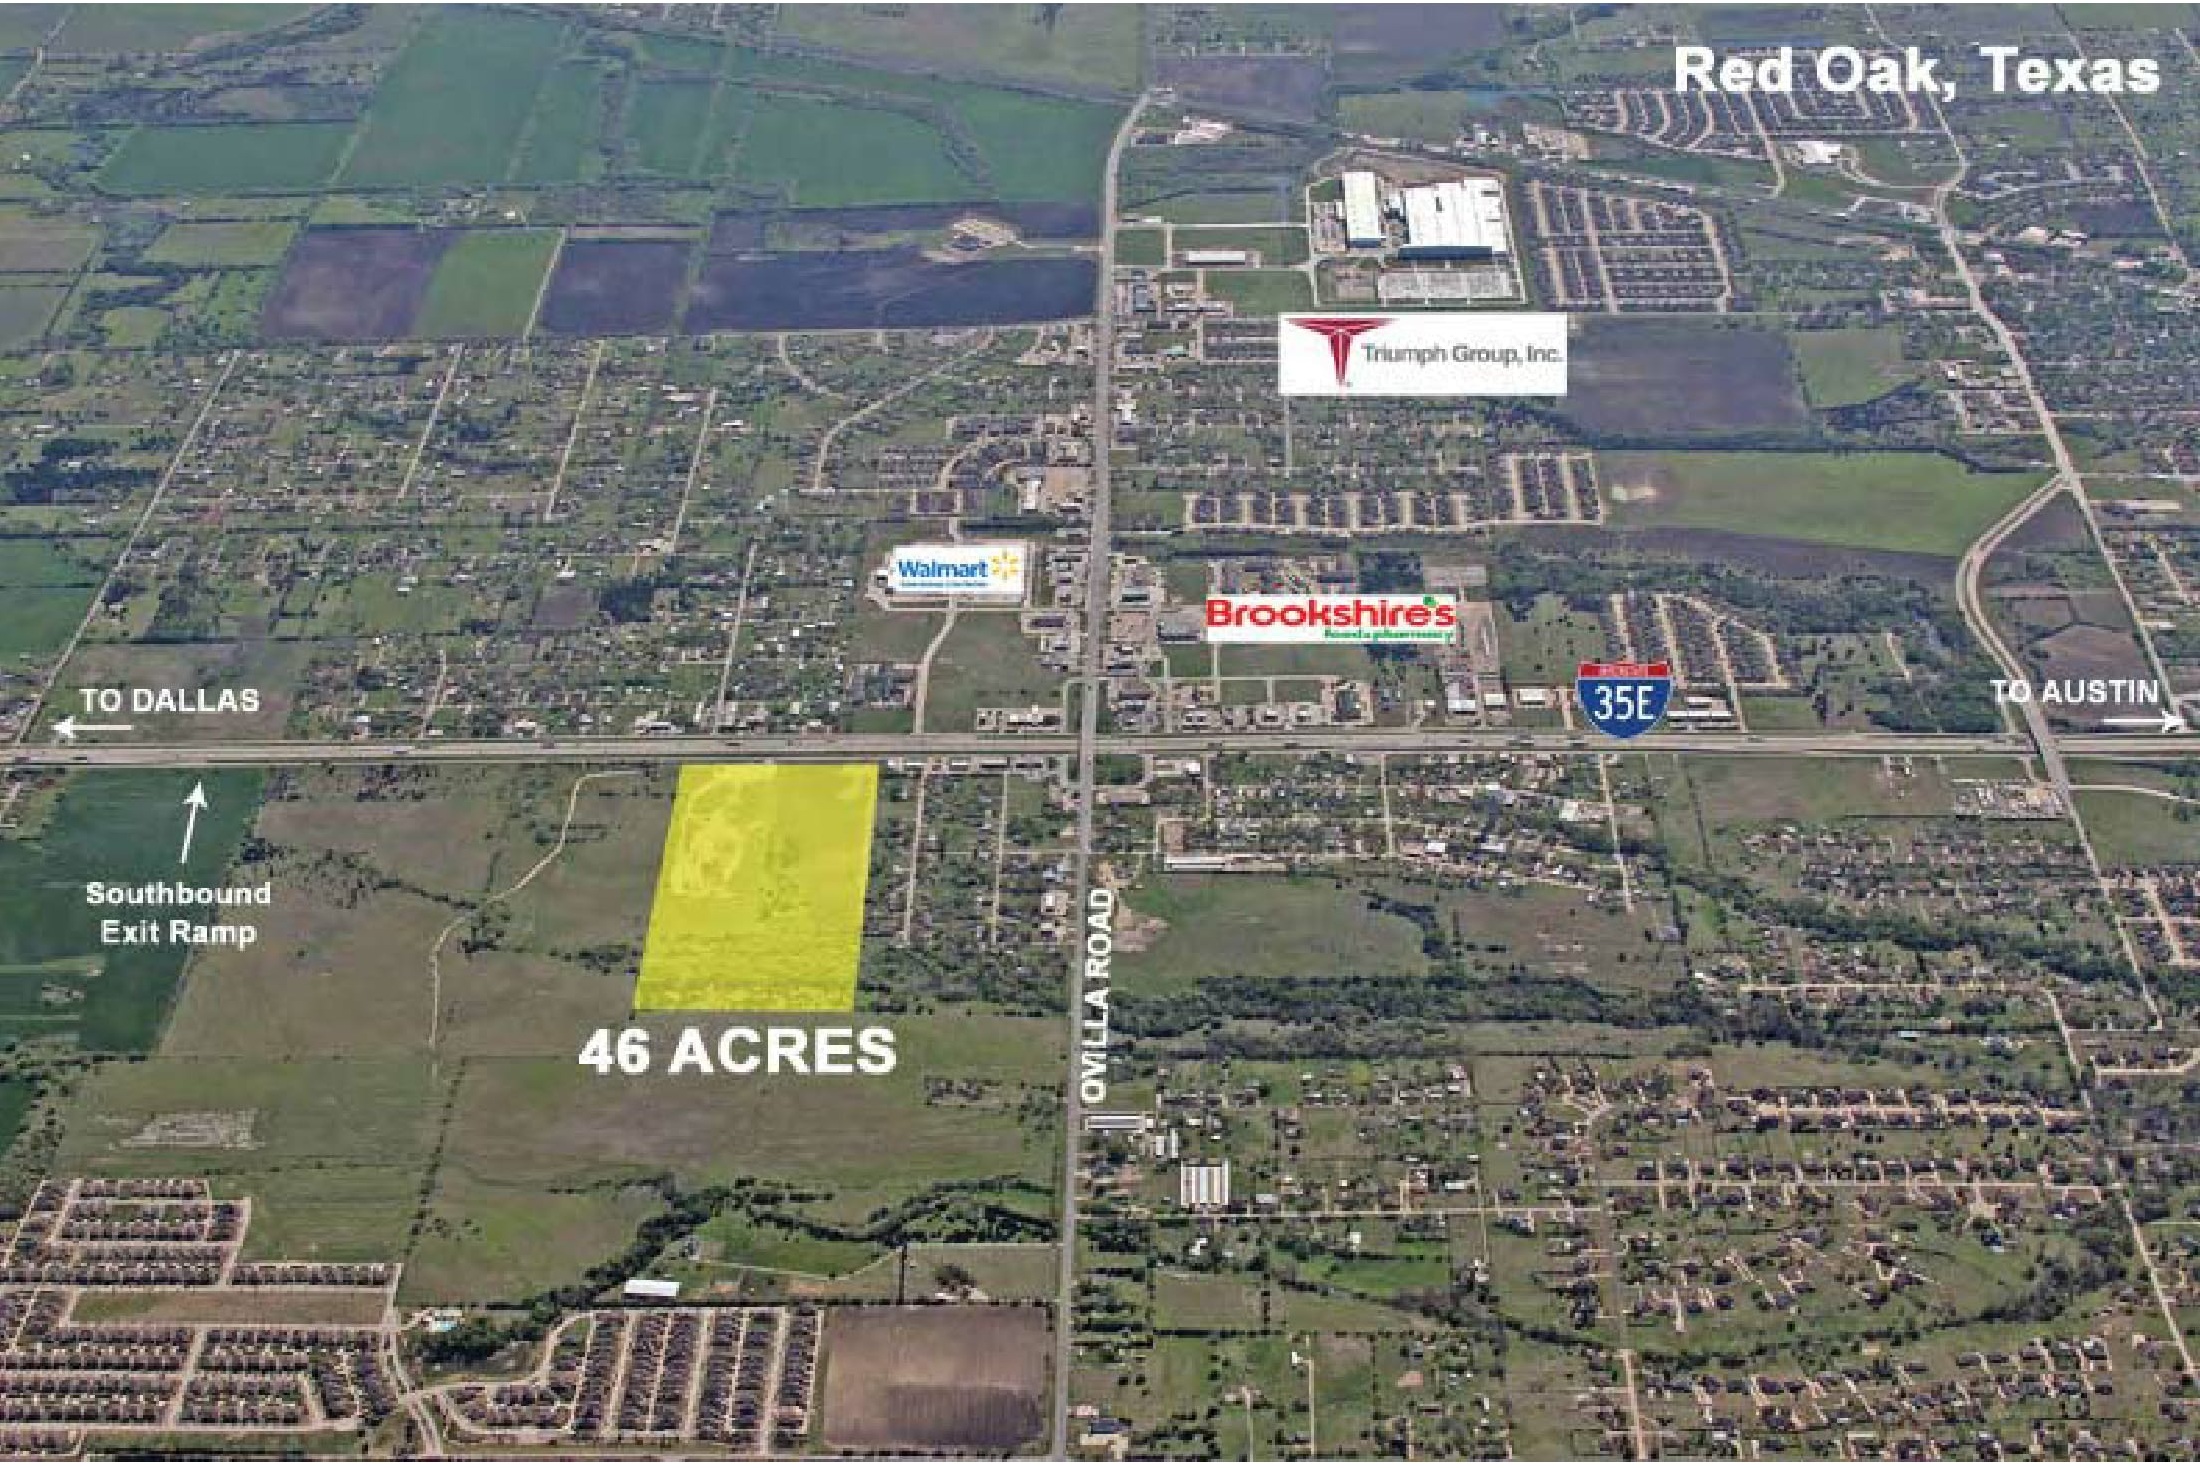 RETAIL / COMMERCIAL LAND